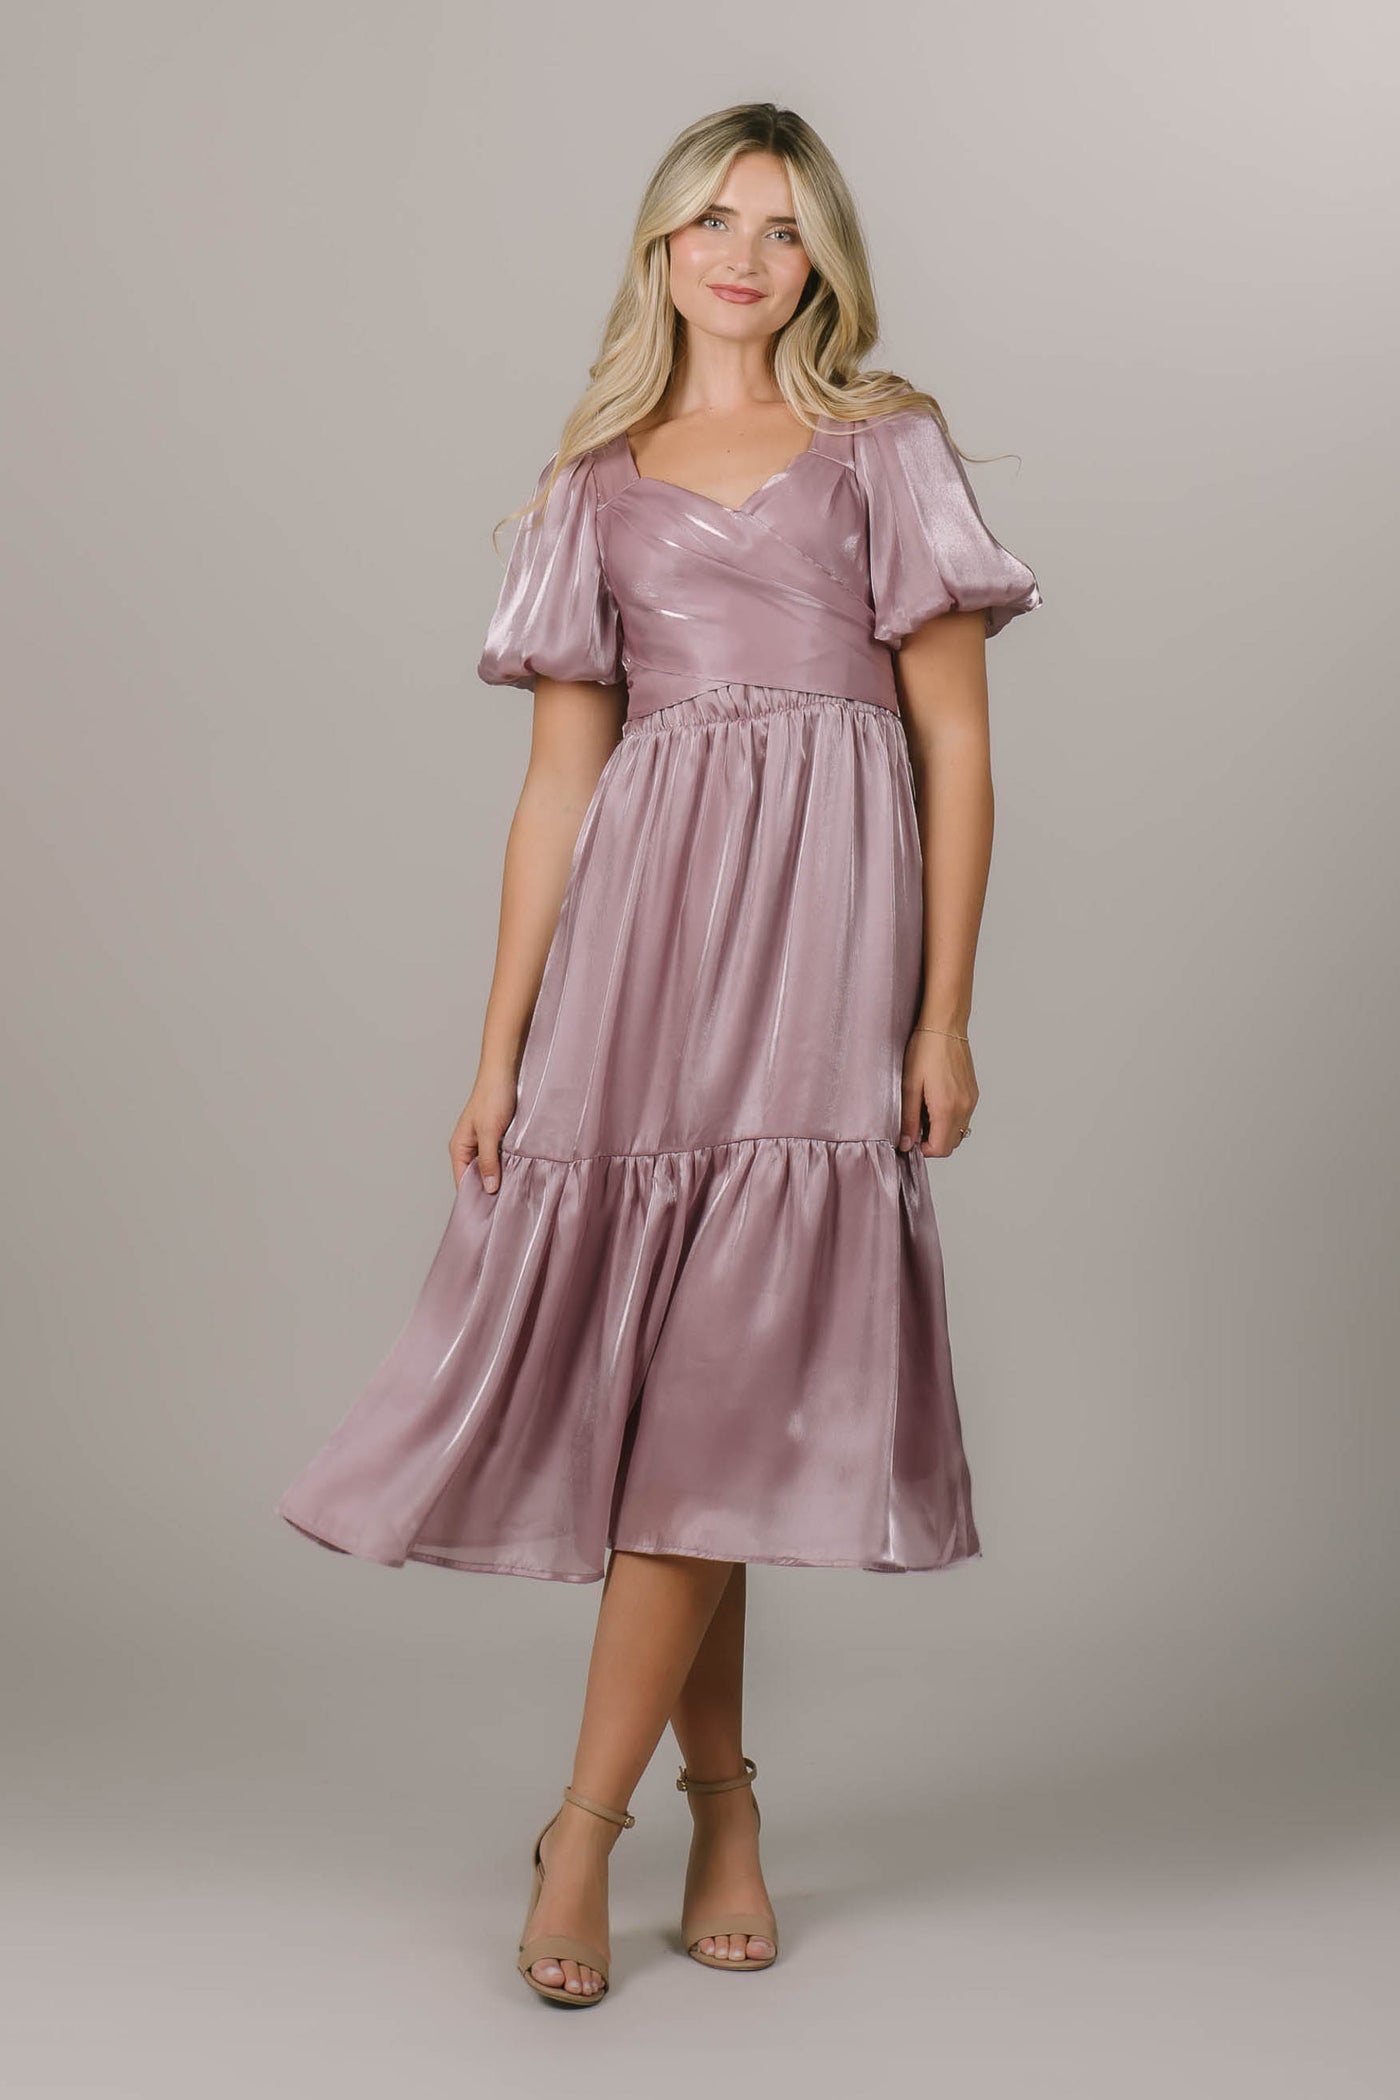 This is a modest bridesmaid dress with a wrap bodice and a shimmery pink fabric.